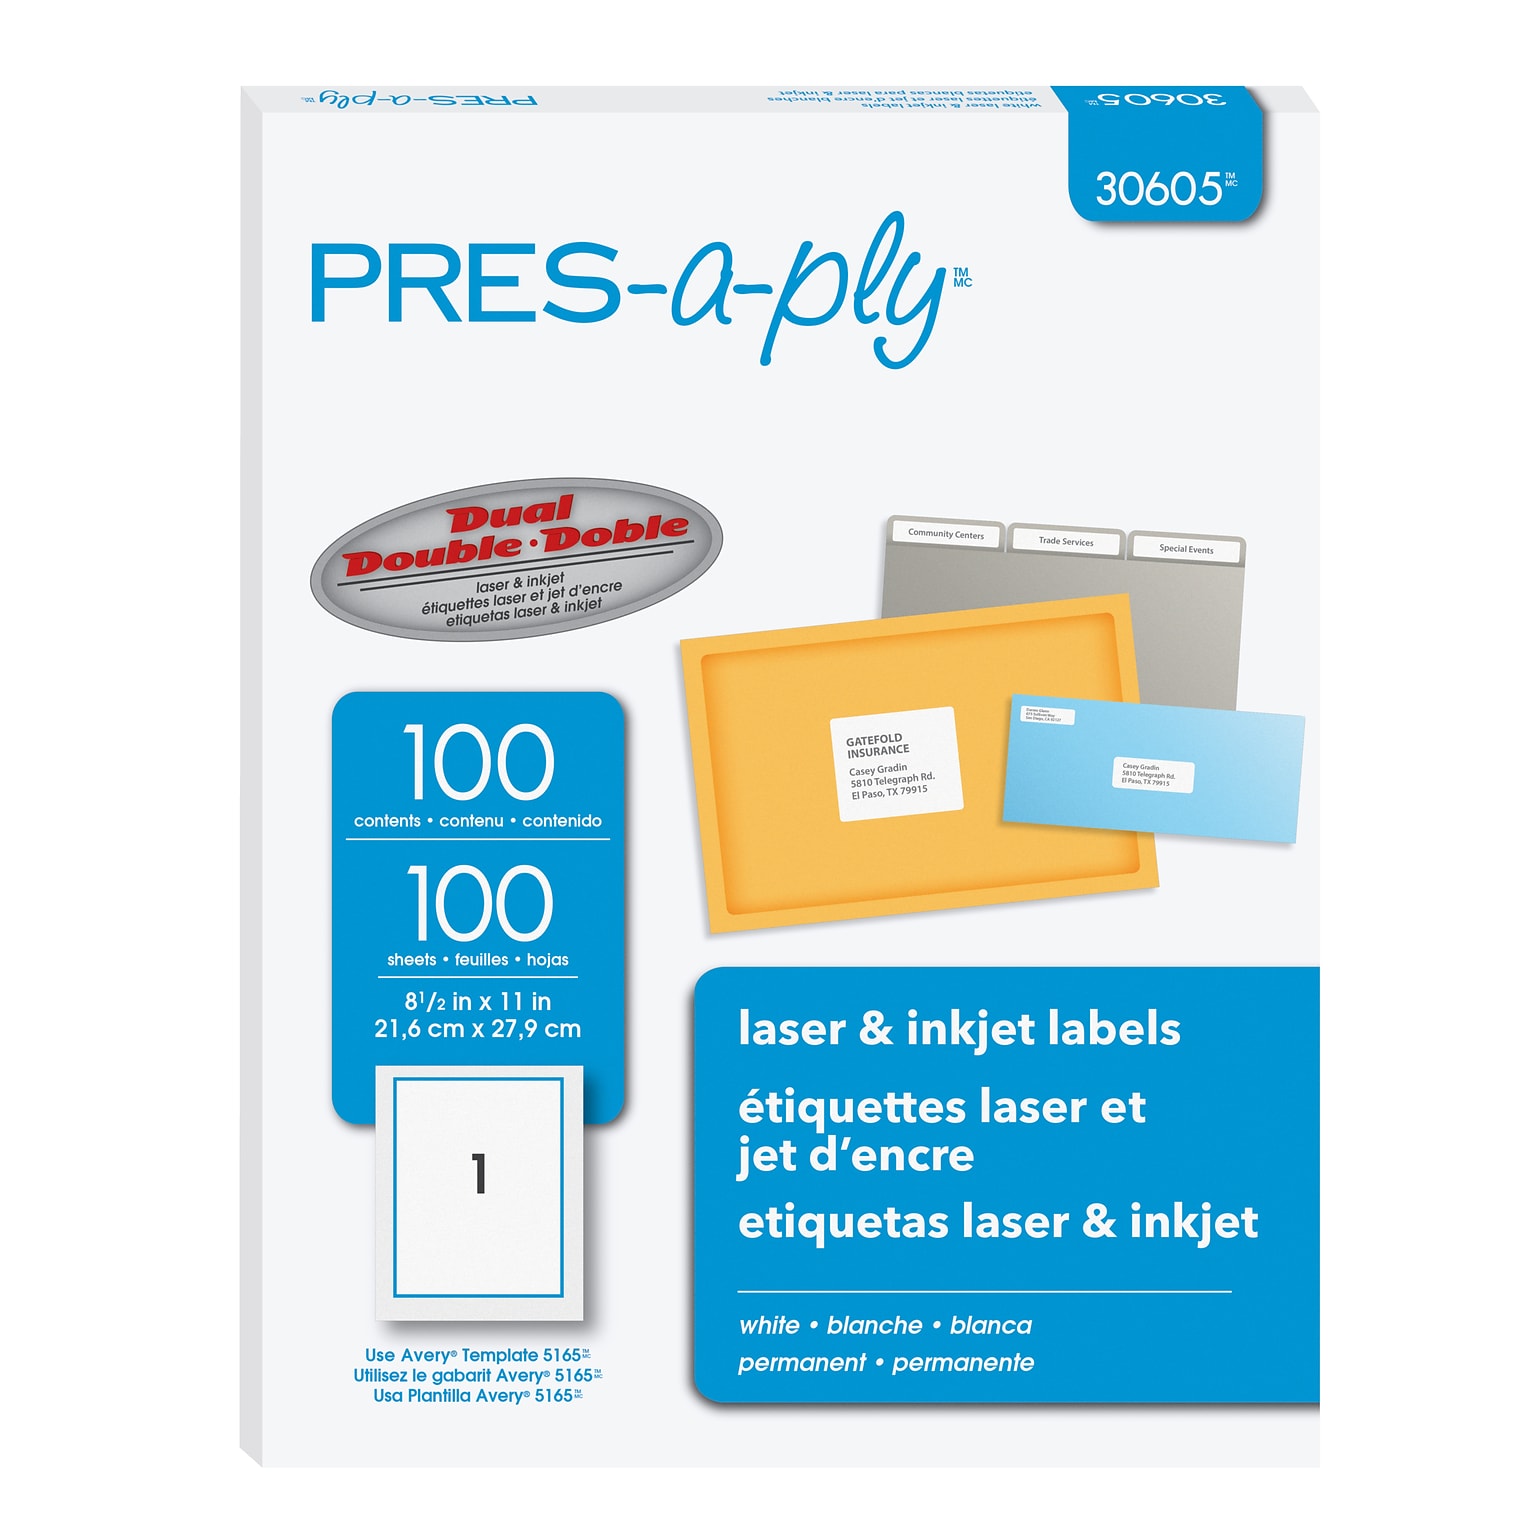 PRES-a-ply Laser/Inkjet Shipping Labels, 8-1/2 x 11, White, 1 Label/Sheet, 100 Sheets/Box (30605)